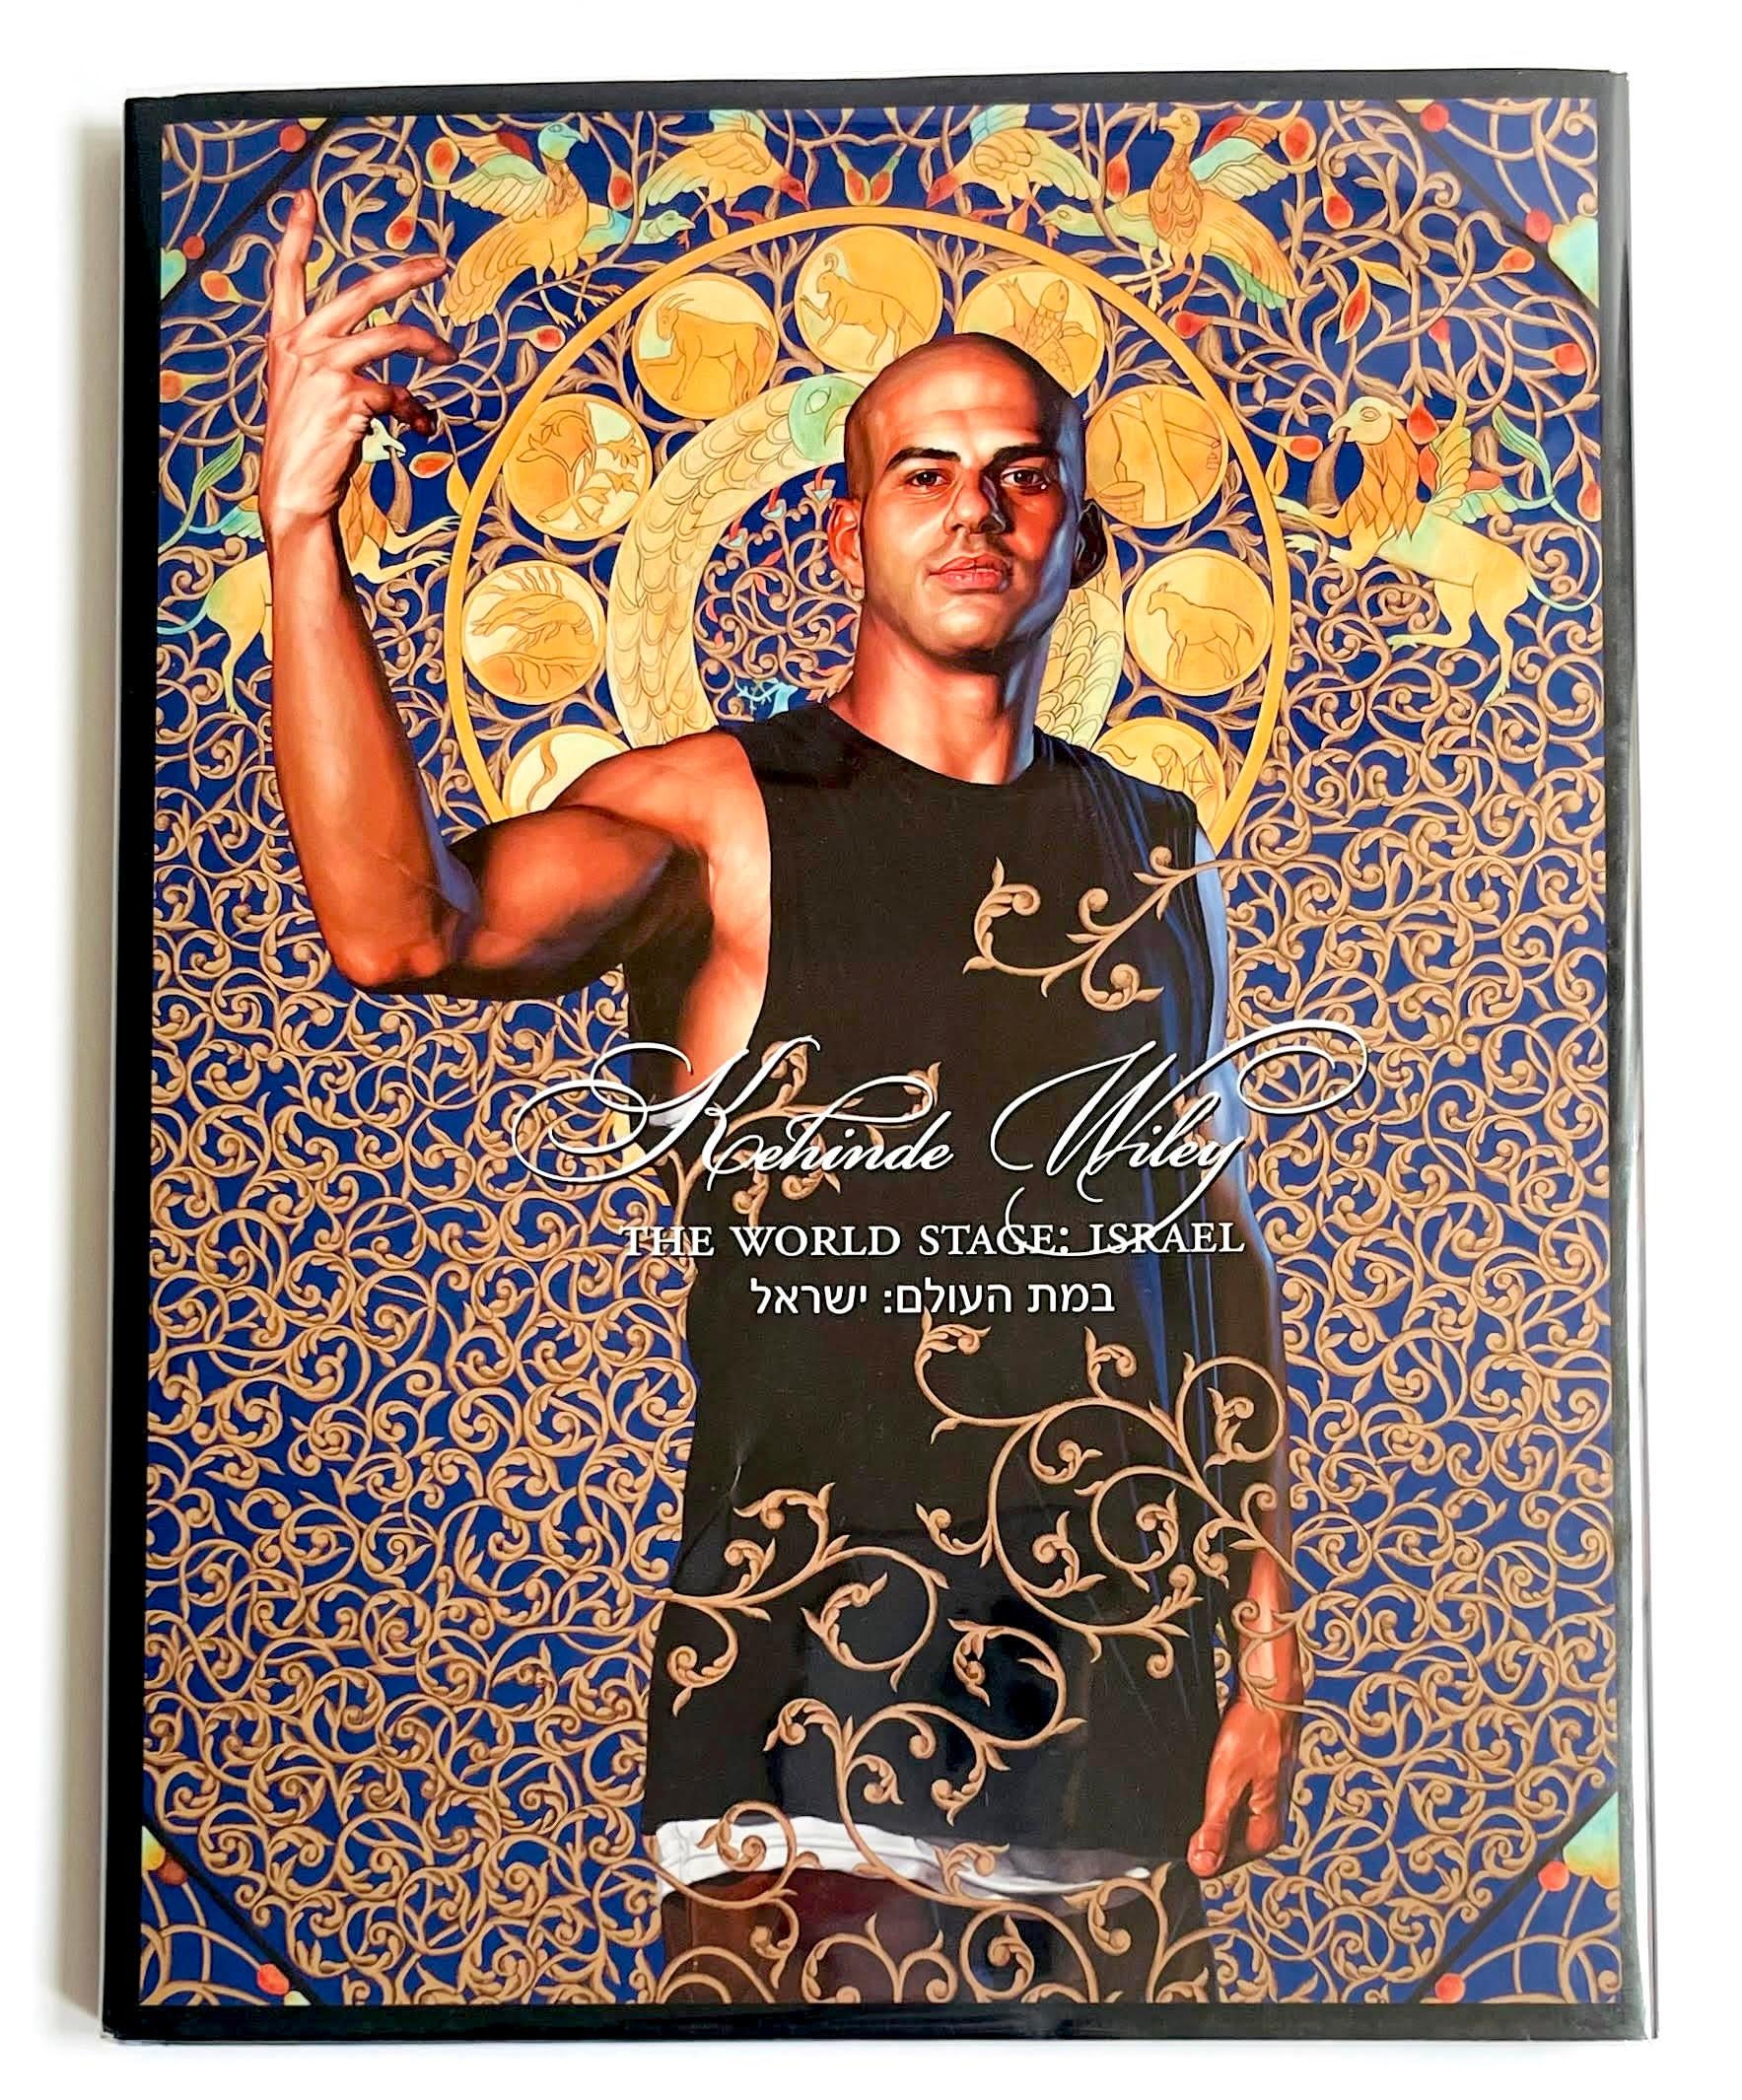 The World Stage: Israel (Hand Signed by Kehinde Wiley) For Sale 9